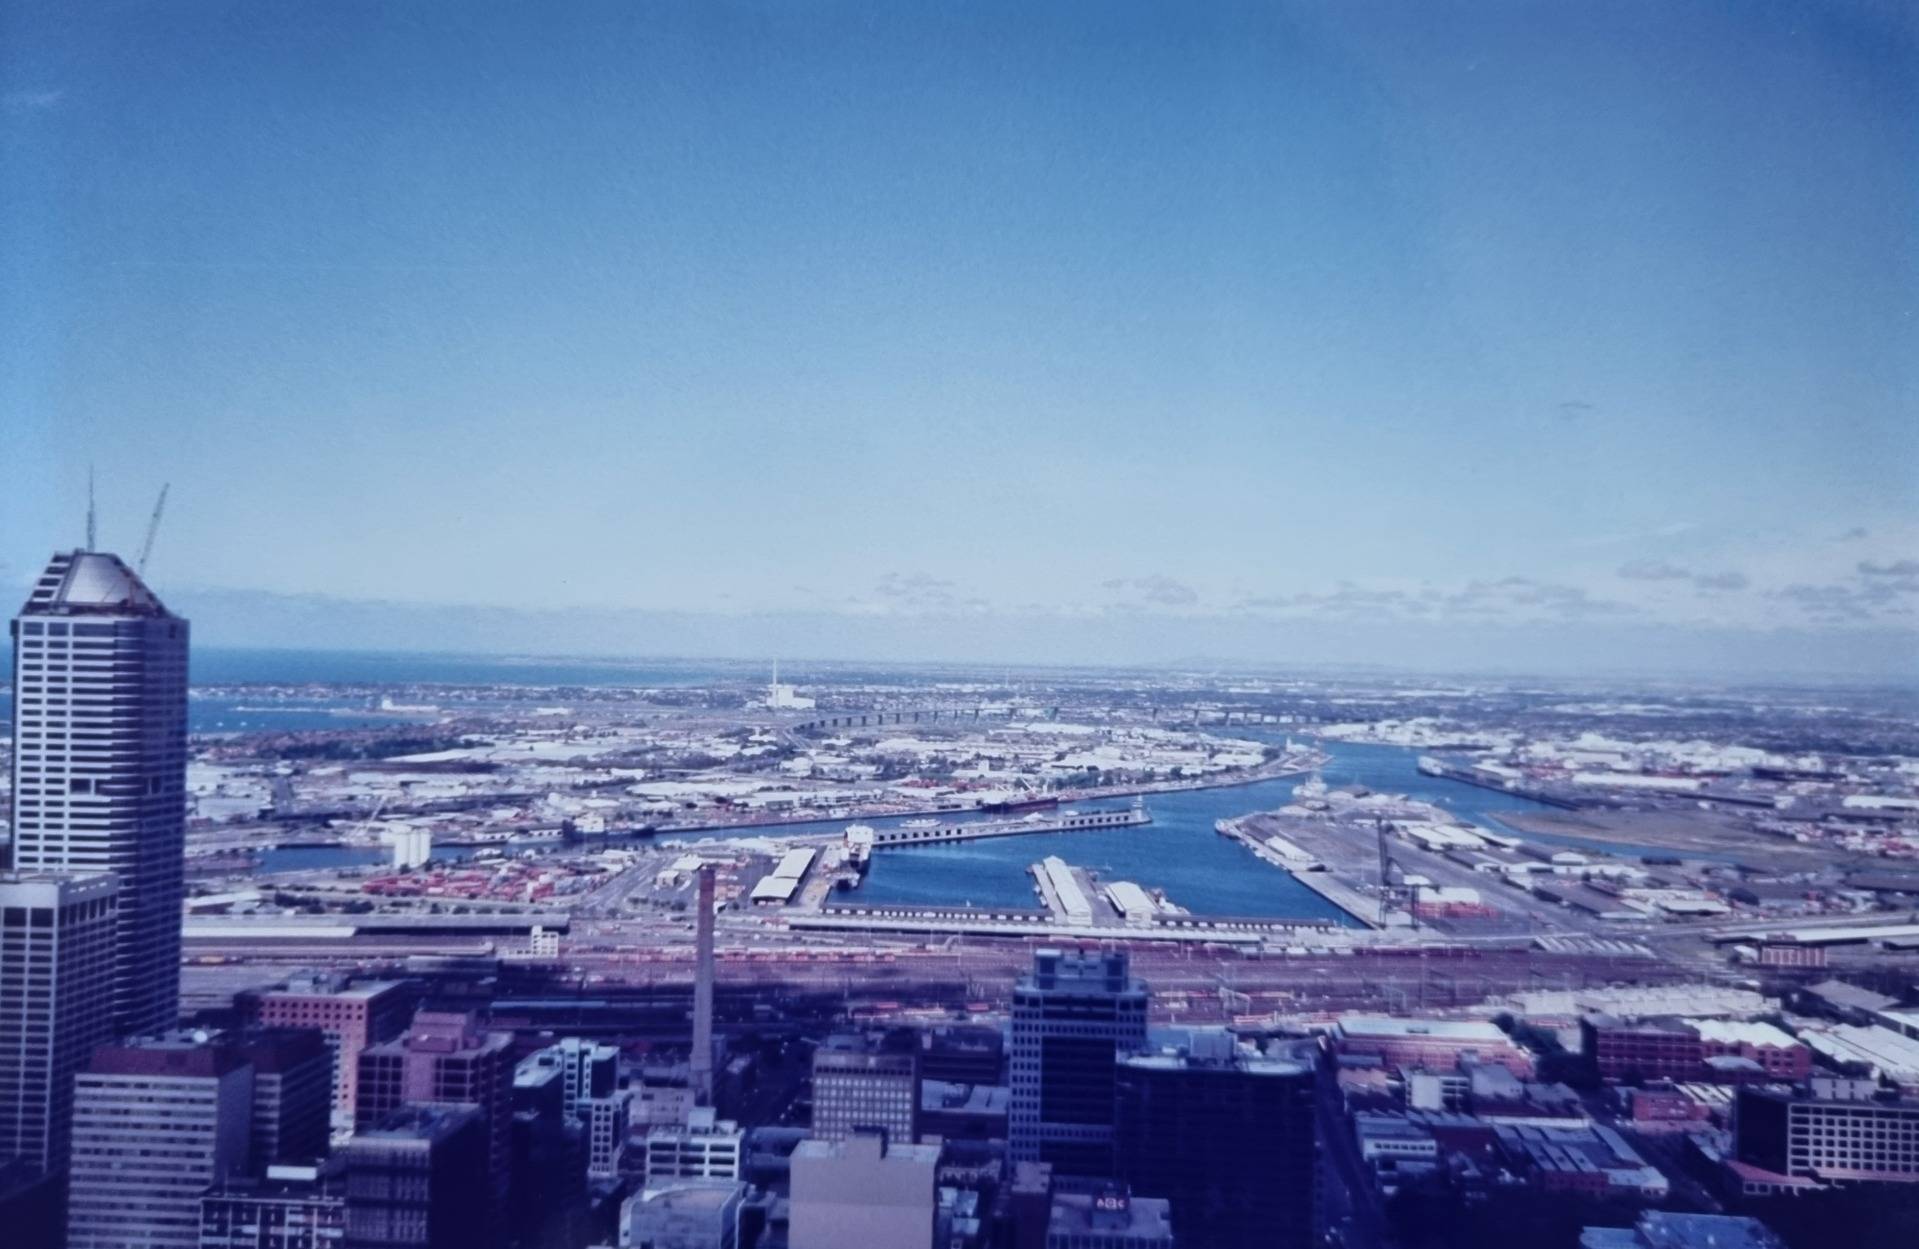 Docklands before the big Football Stadium was built.